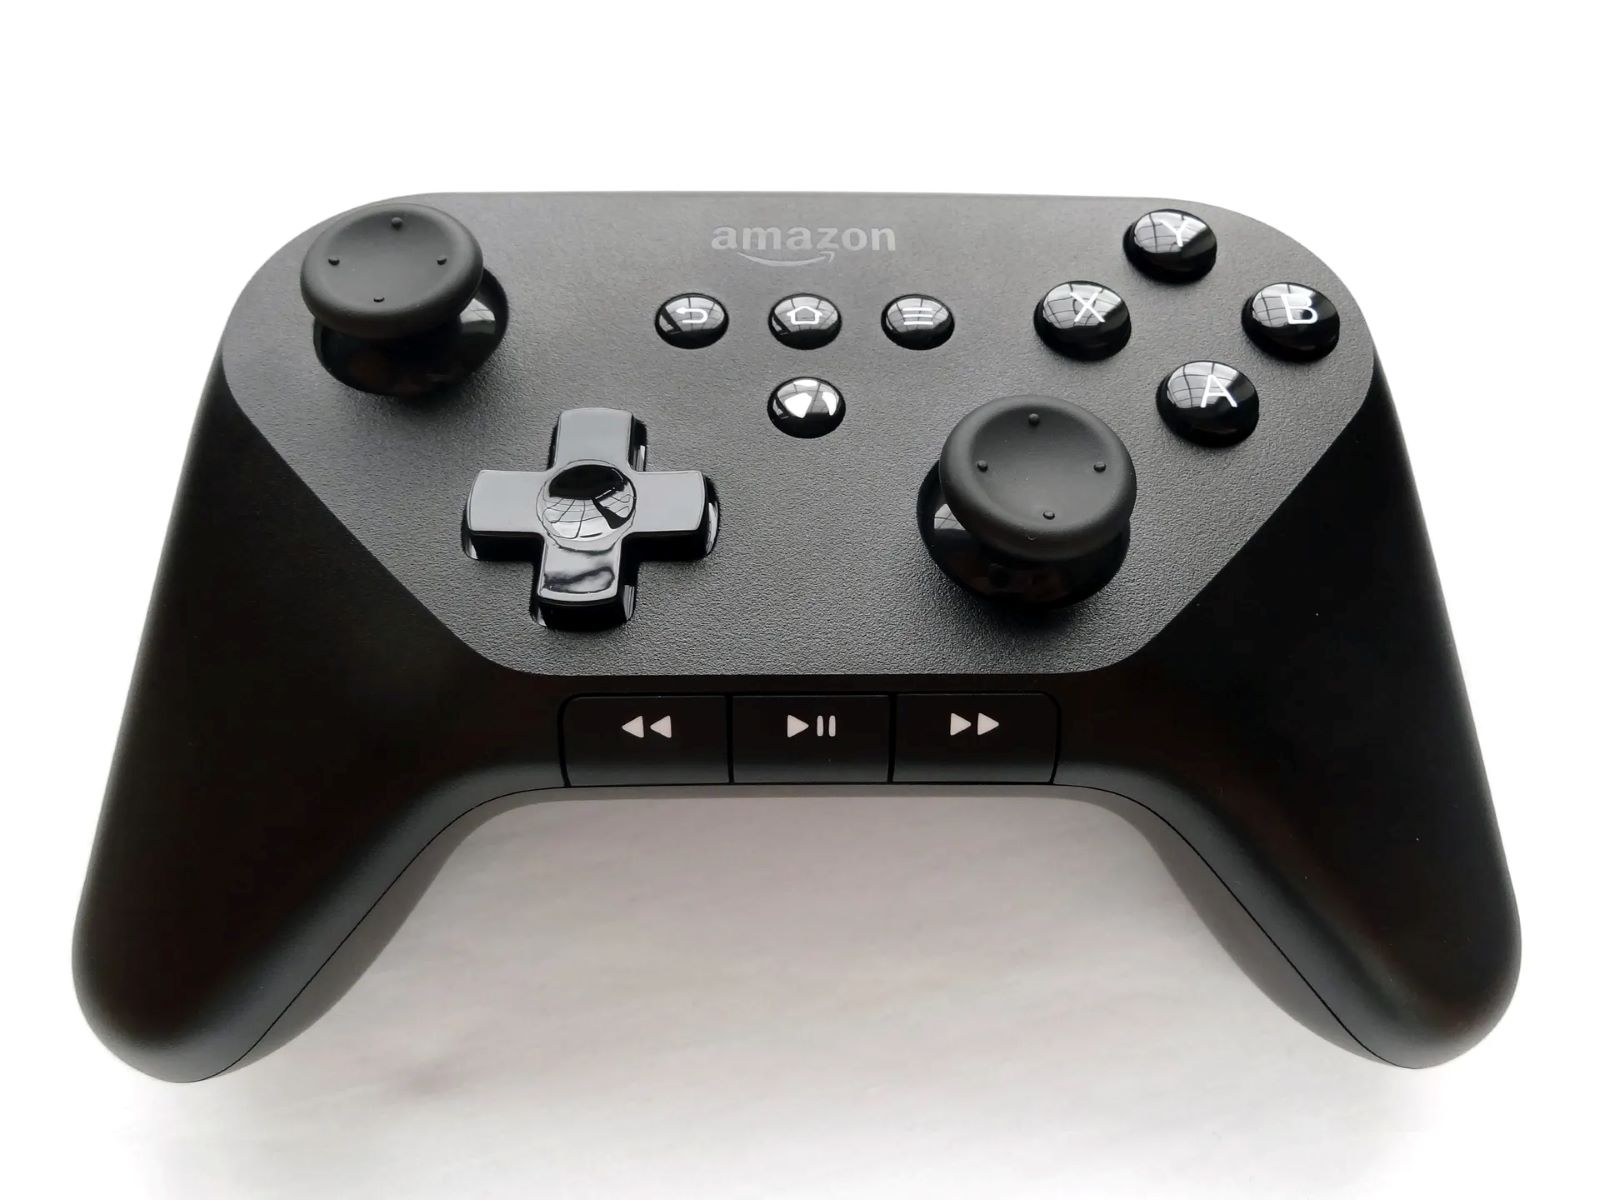 How To Unpair An Amazon Fire TV Game Controller